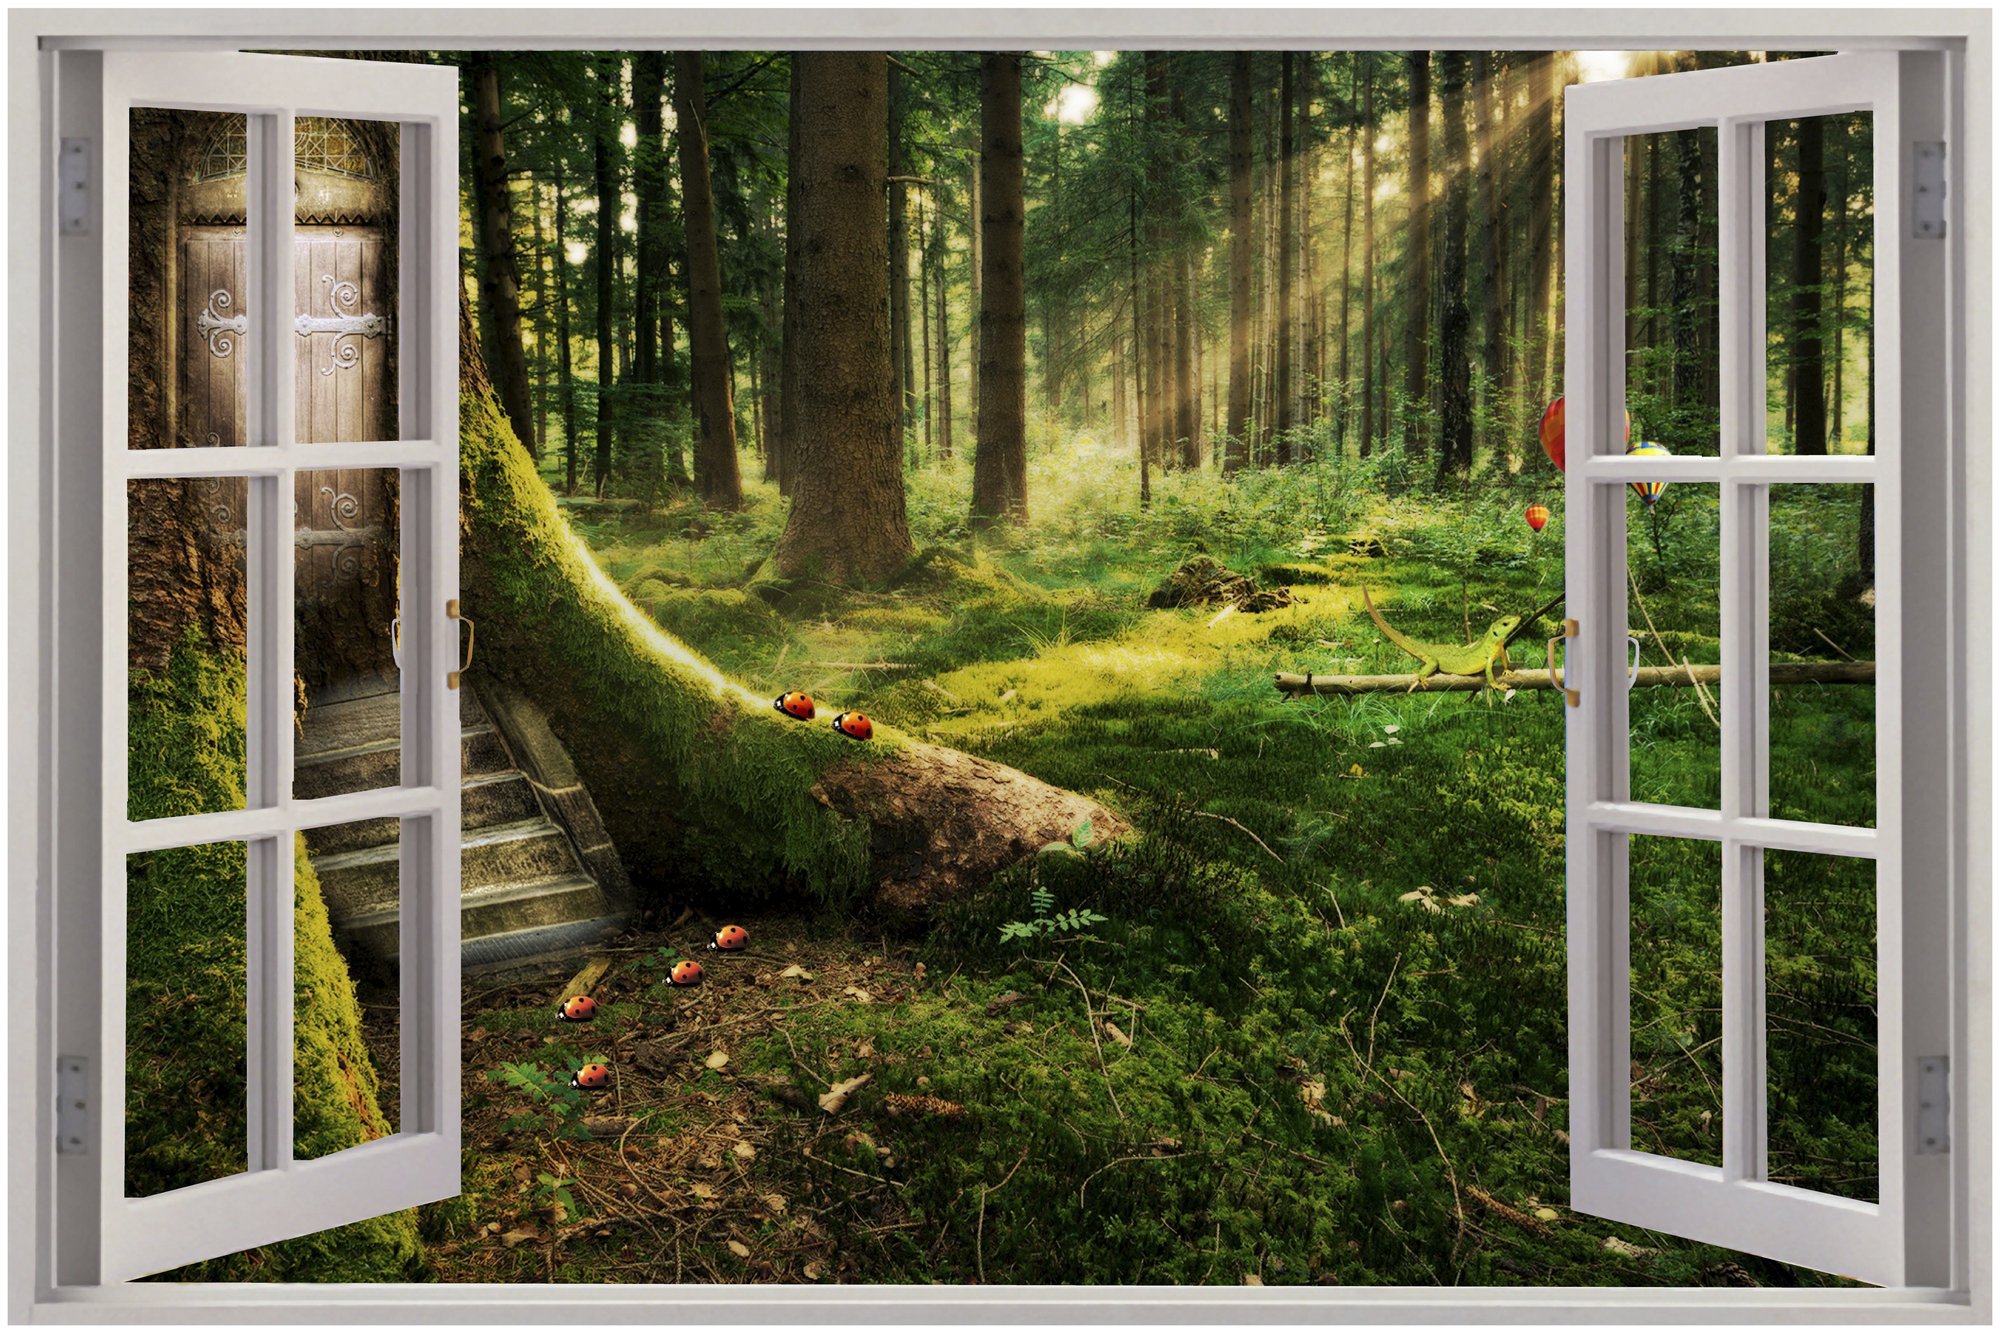  Window Enchanted Forest View Wall Stickers Mural Art Decal Wallpaper